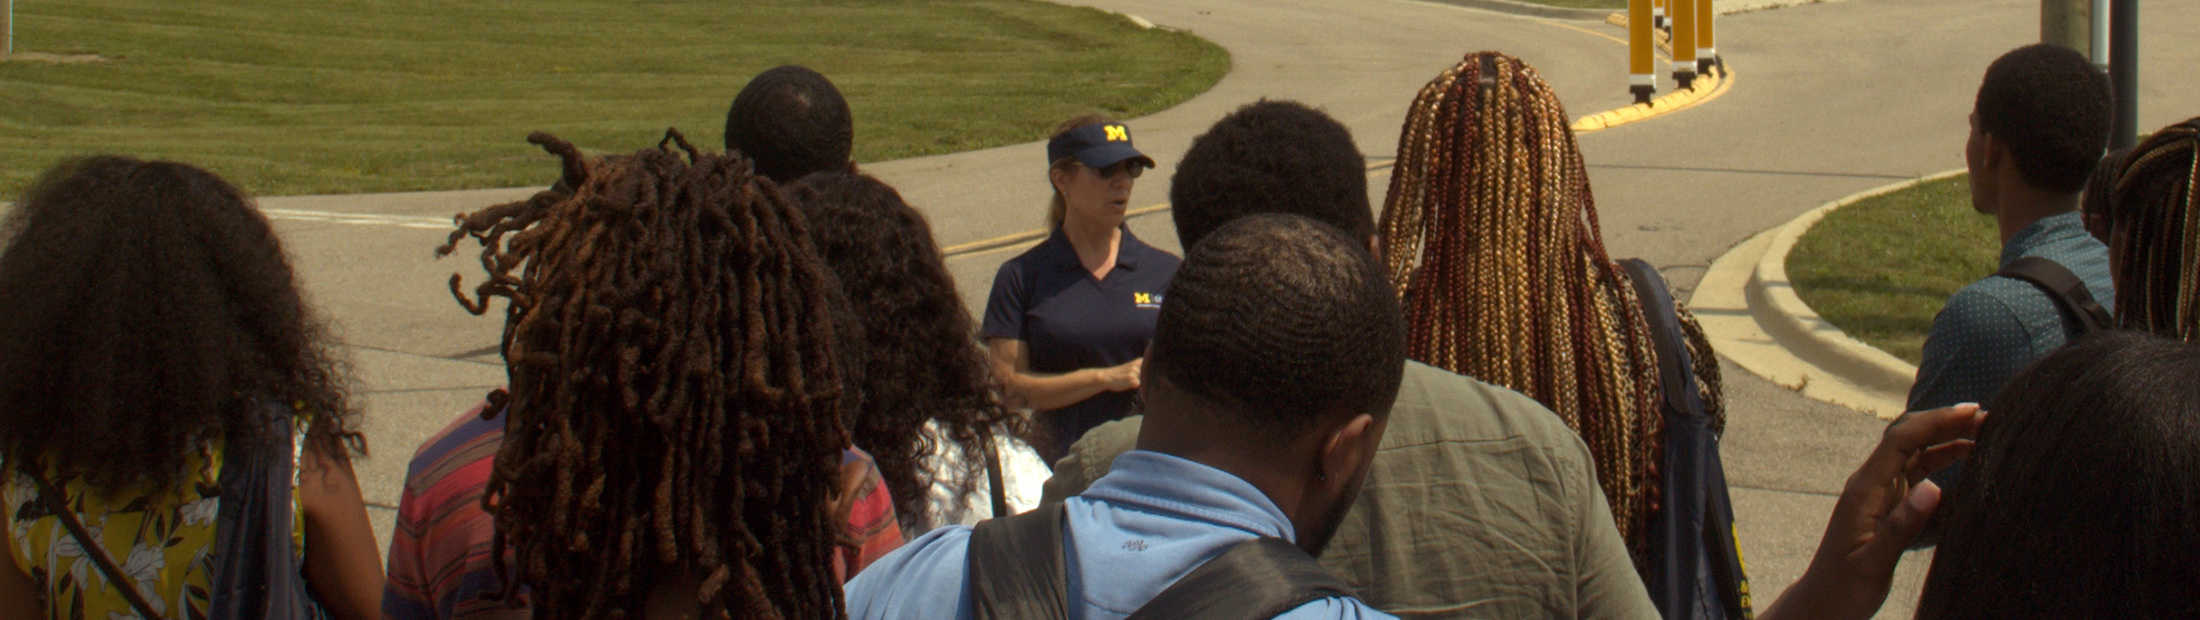 Tour guide talking to group of students at autonomous vehicle test facility